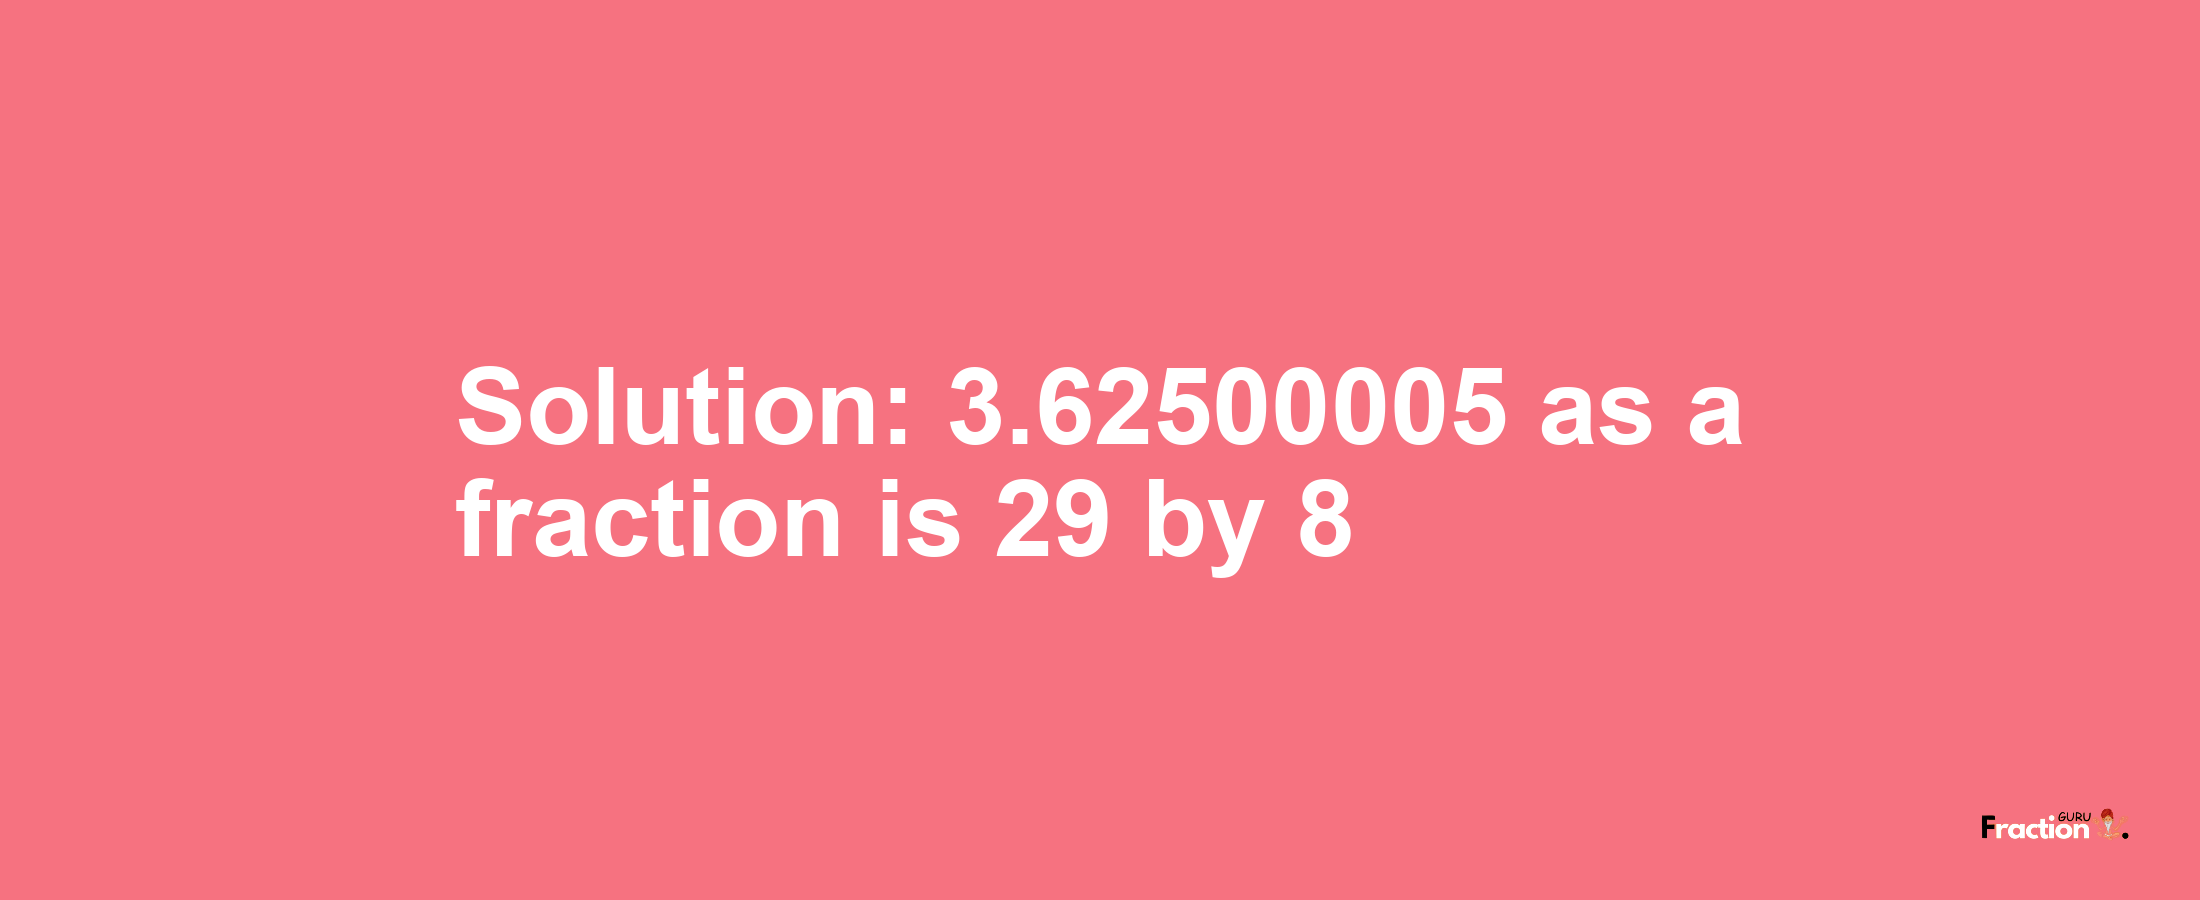 Solution:3.62500005 as a fraction is 29/8